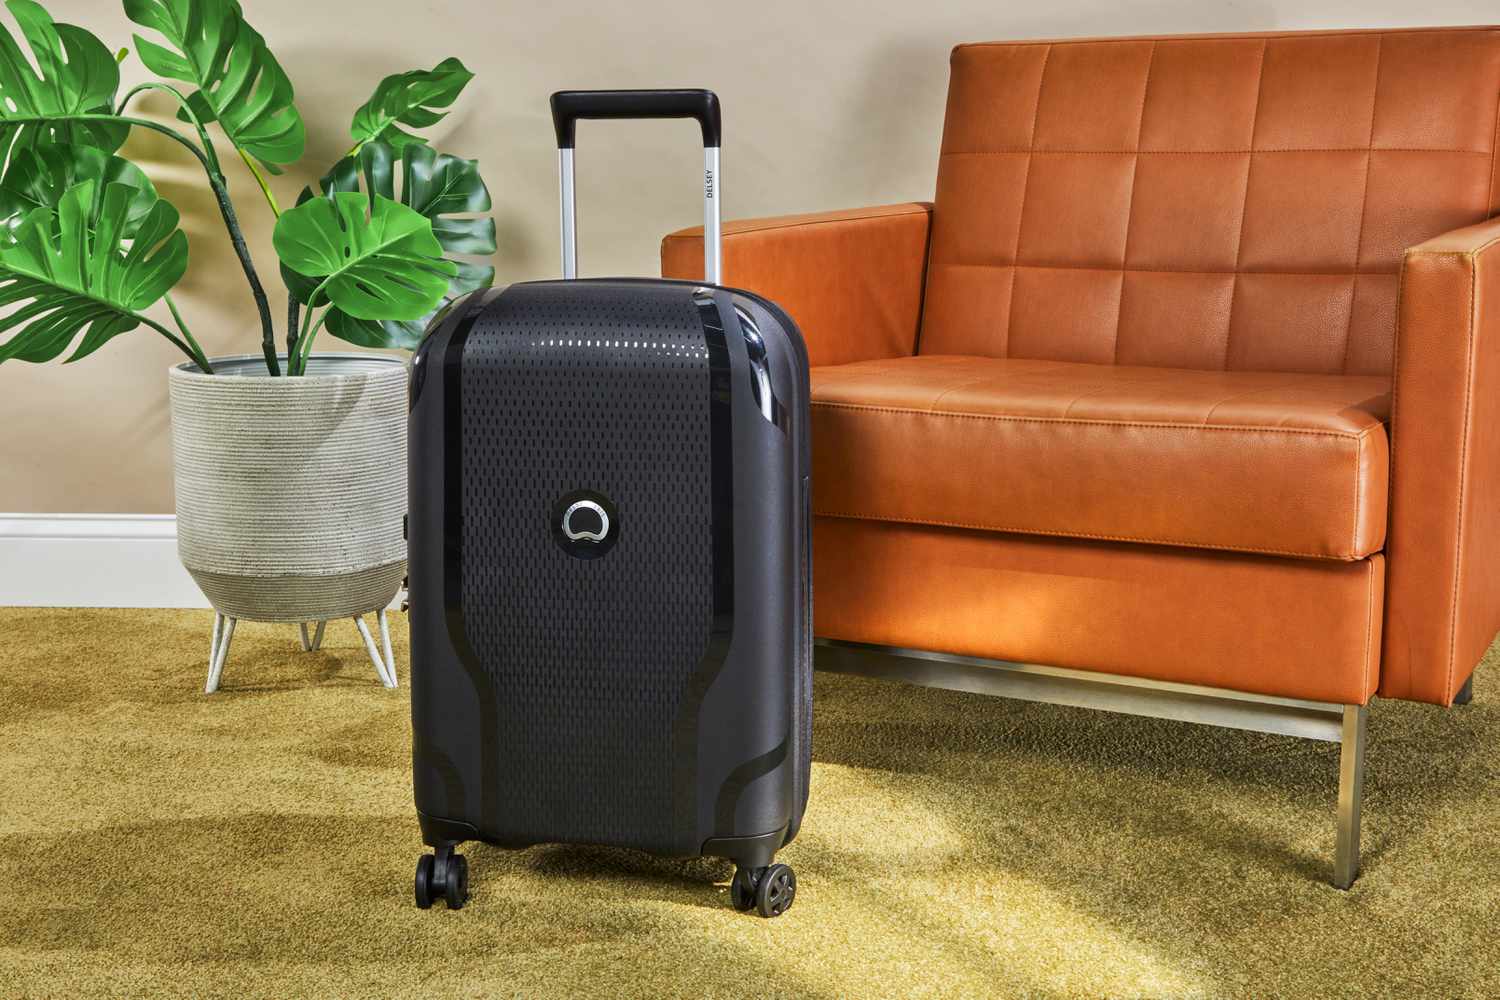 The BEST Lightweight Luggage For Travel